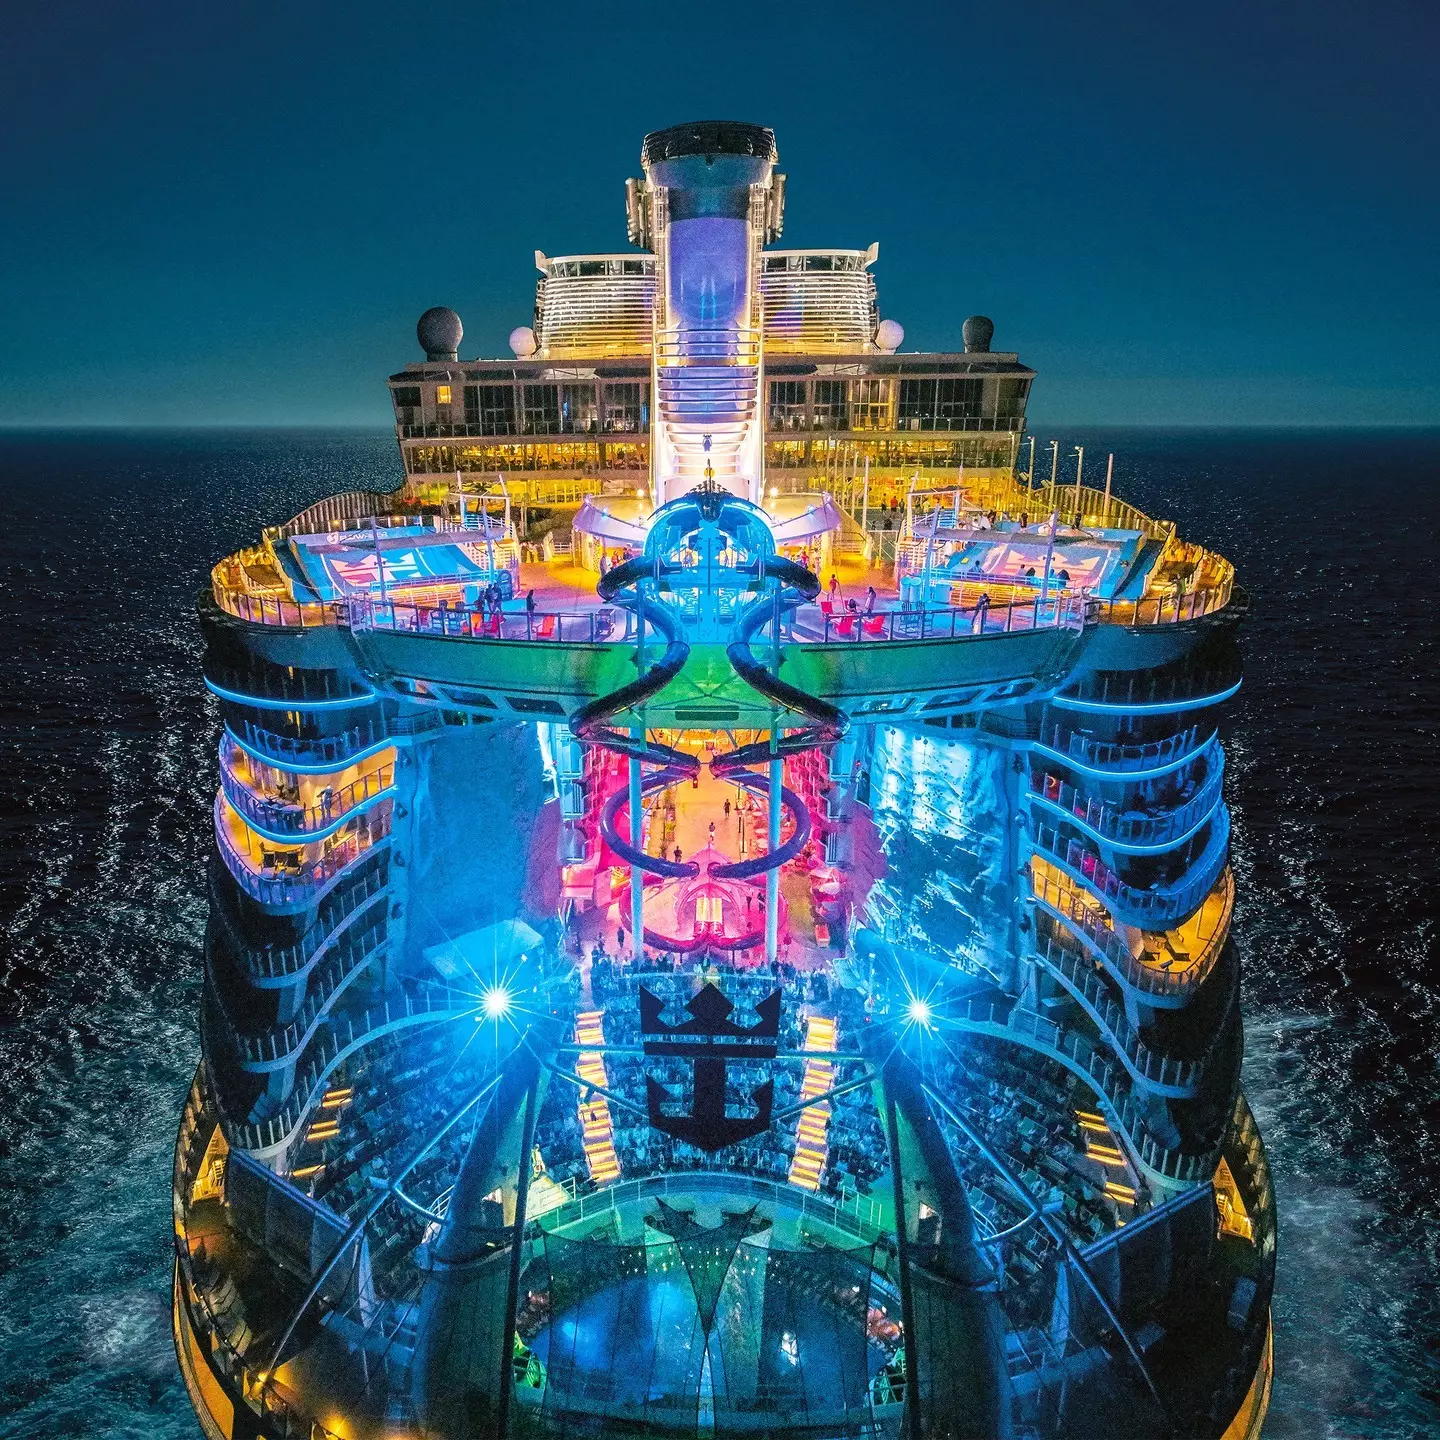 The Harmony of the Seas is longer than the Eiffel Tower.